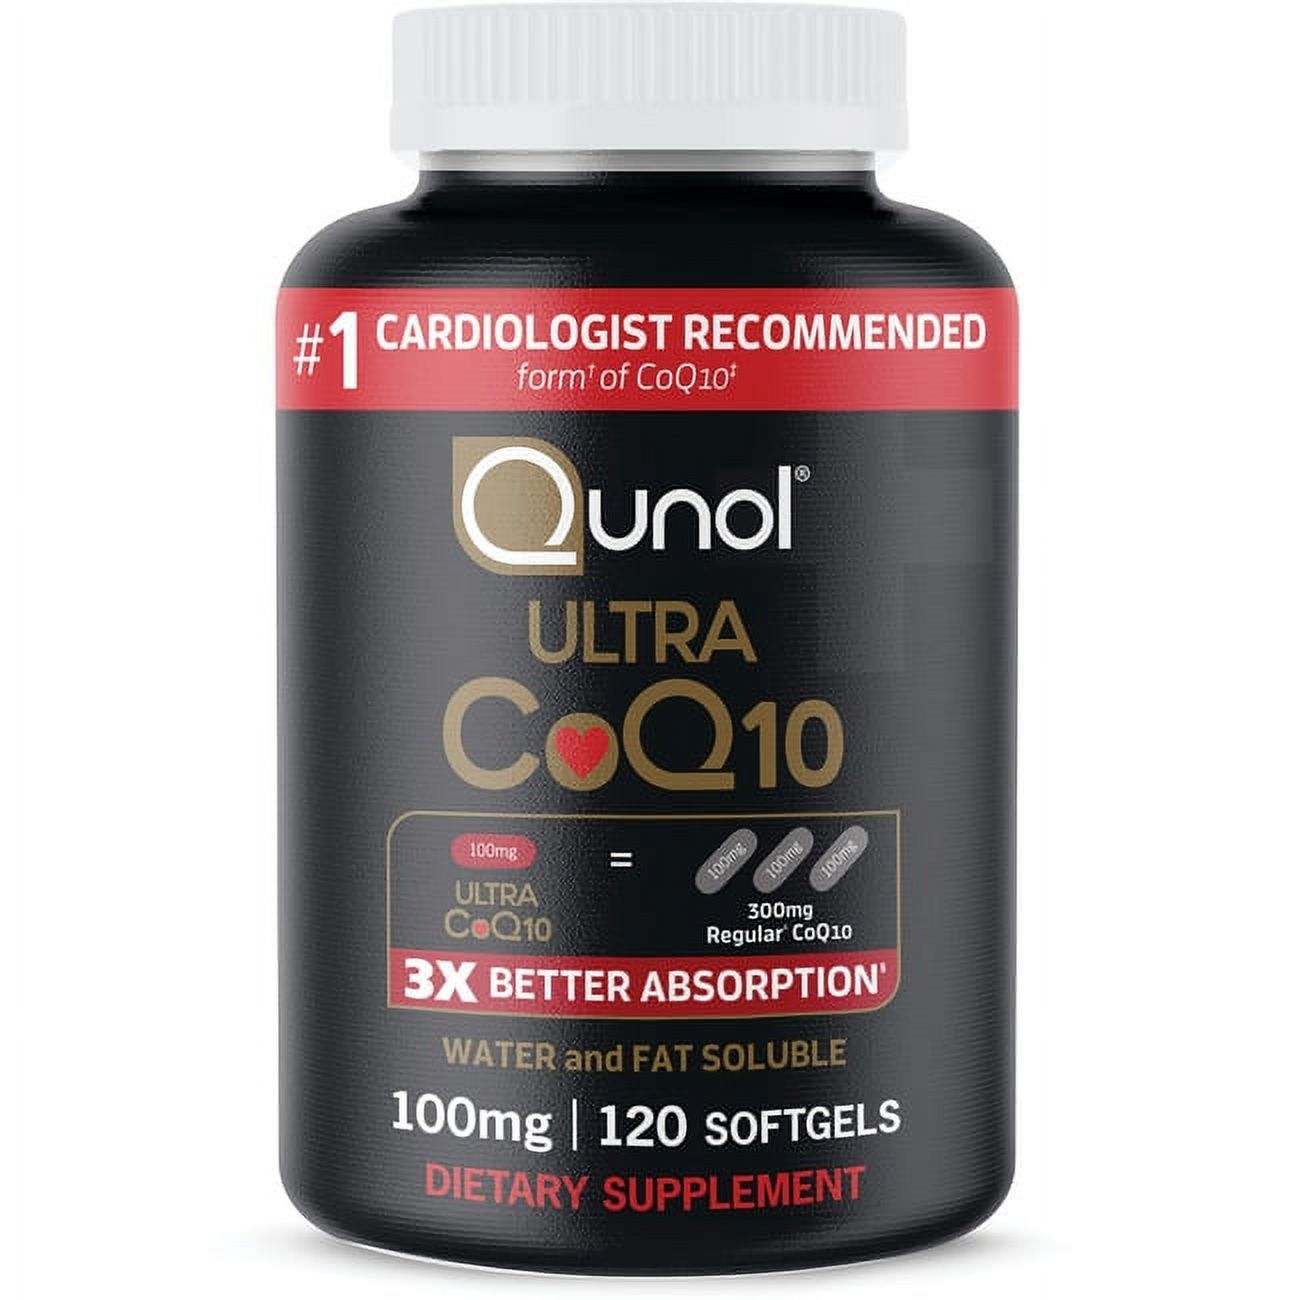 Qunol CoQ10 100mg Softgels, Ultra CoQ10 100mg, 3x Better Absorption, Antioxidant for Heart Health & Energy Production, Coenzyme Q10 Vitamins and Supplements, 4 Month Supply, 120 Count - image 1 of 6